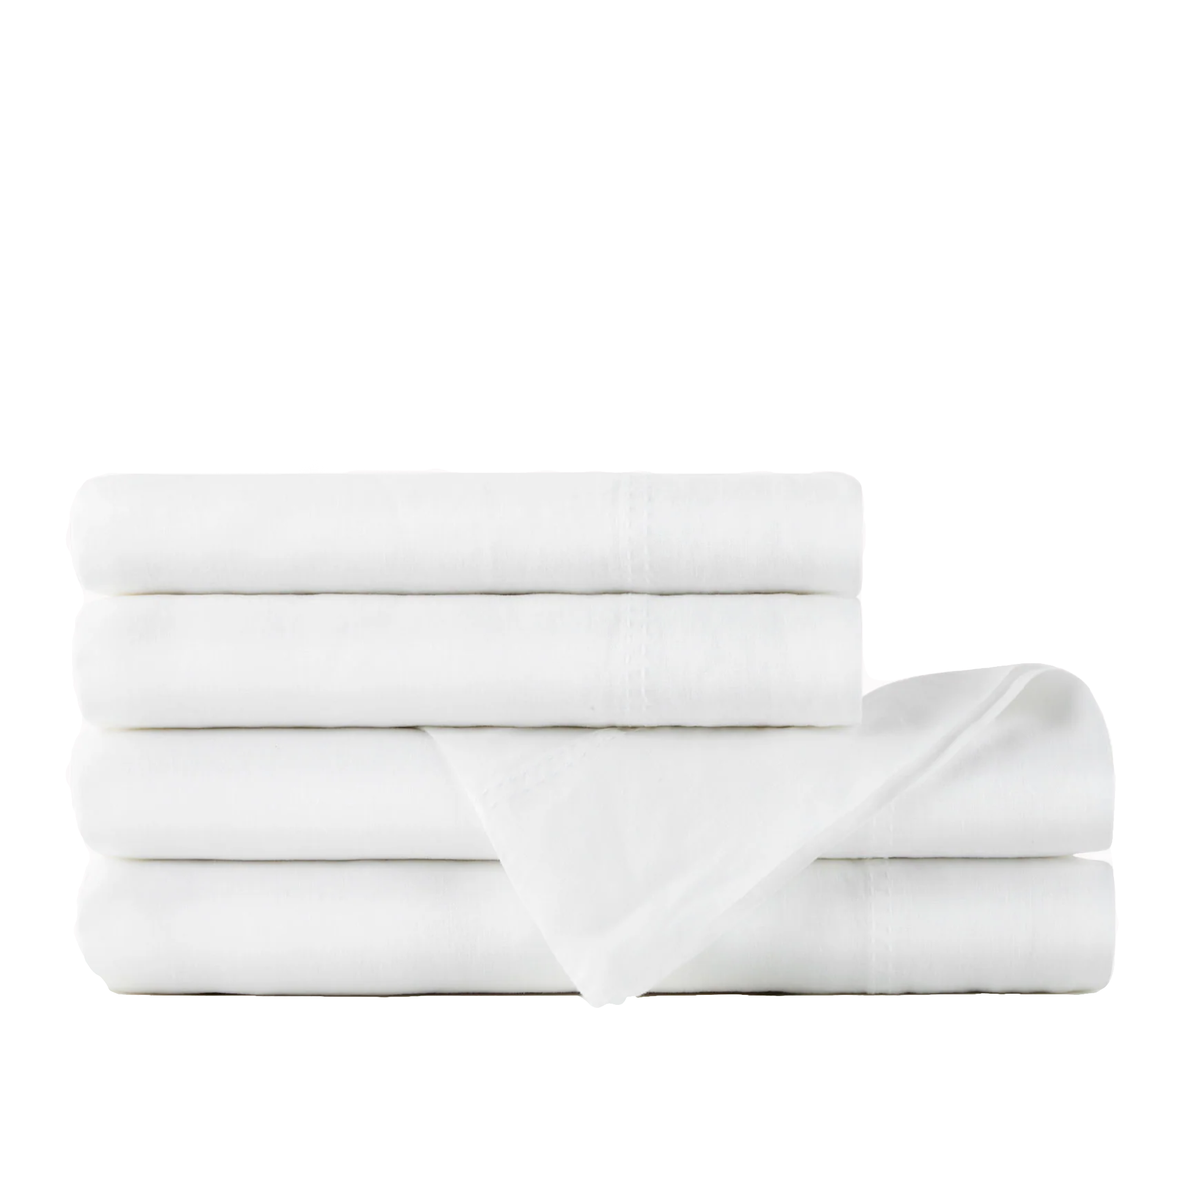 Sheet Set of Peacock Alley European Washed Linen Bedding in White Color